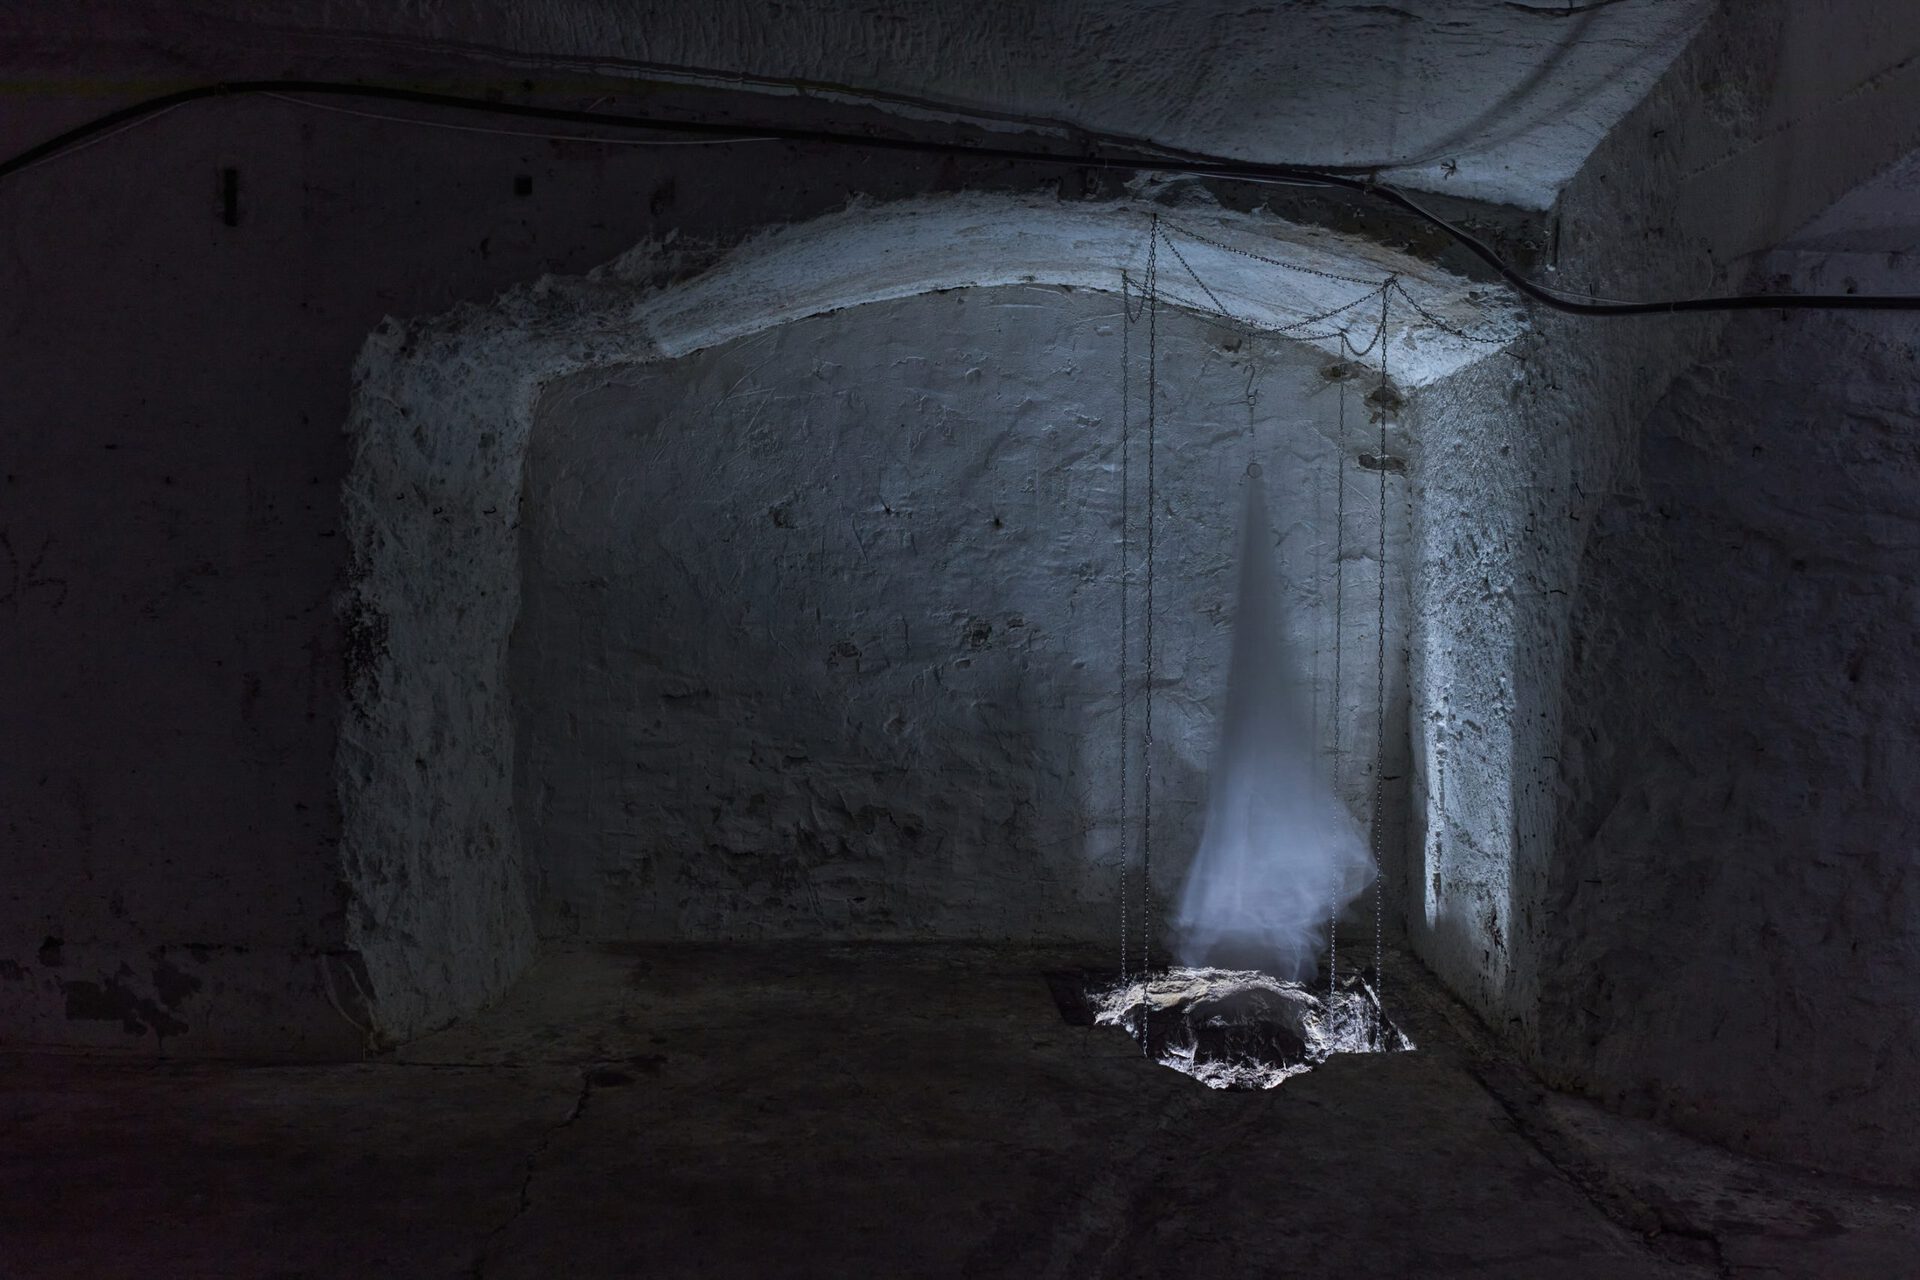 PPILLOVV, COCYTUS (wailing), 2020, Site-specific installation sequence